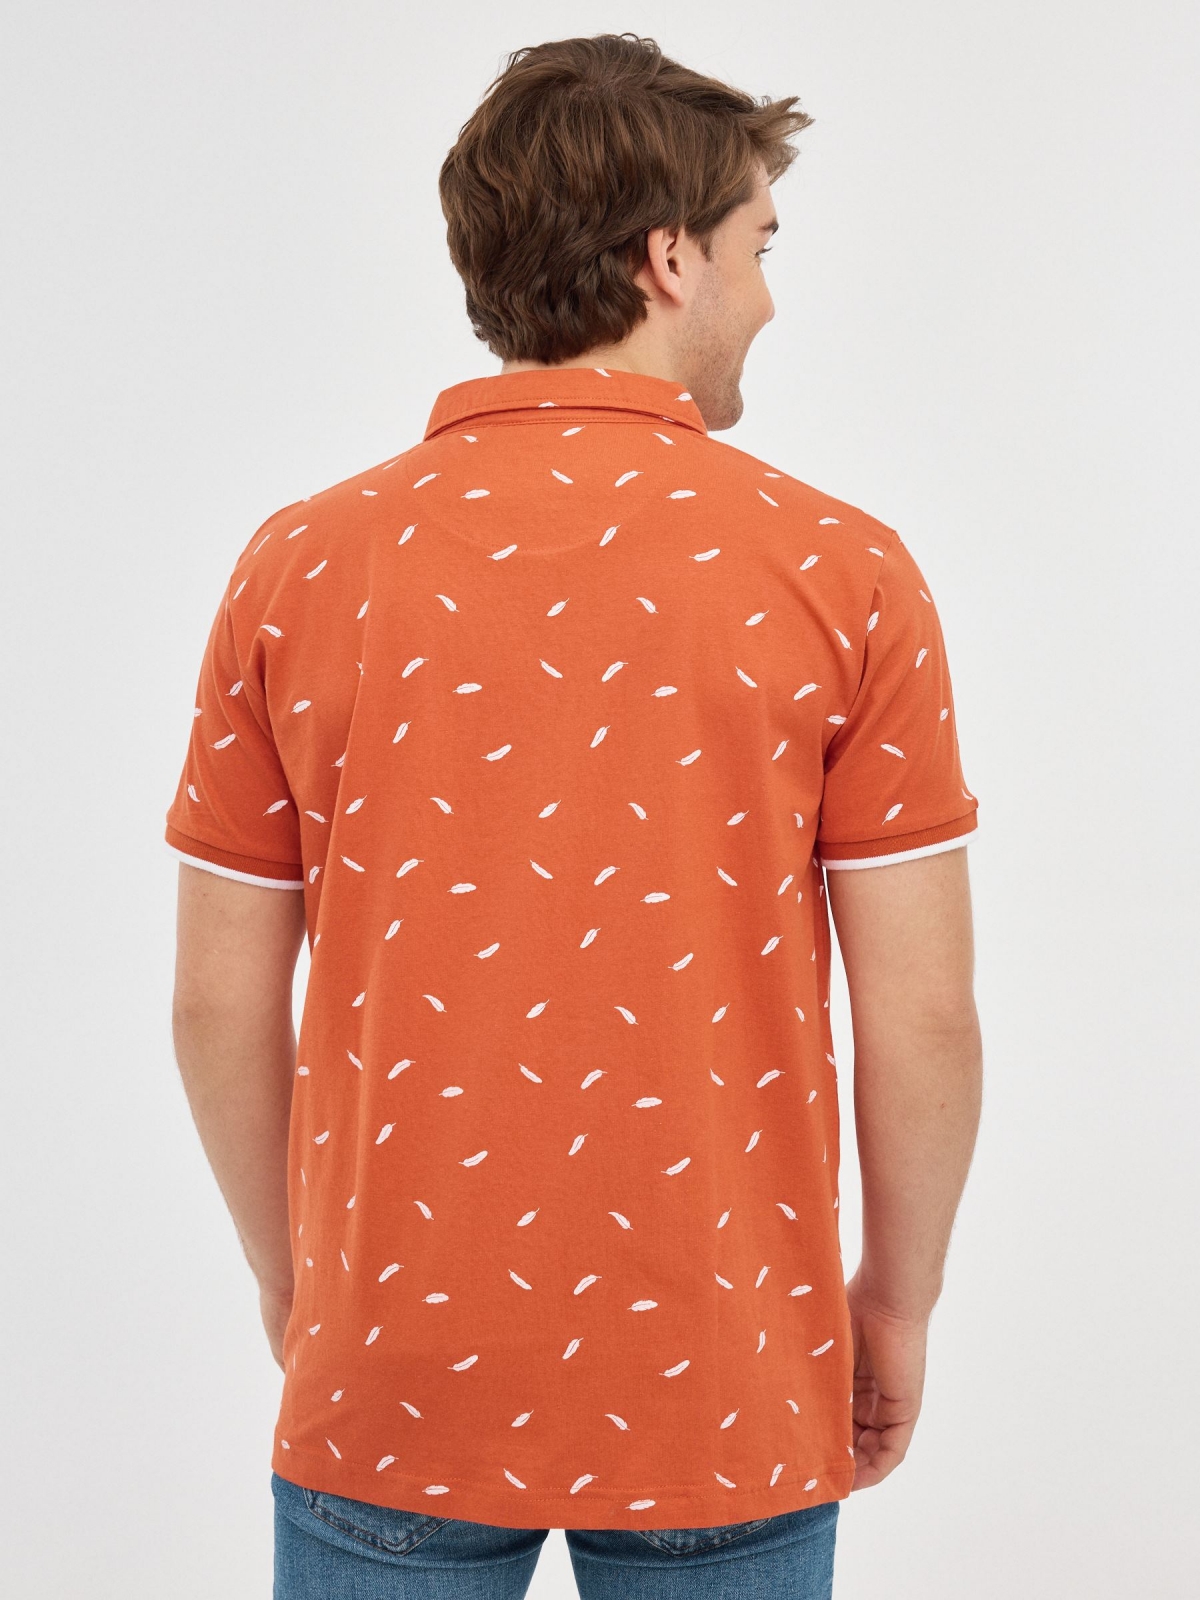 Feather print polo shirt brick red middle back view